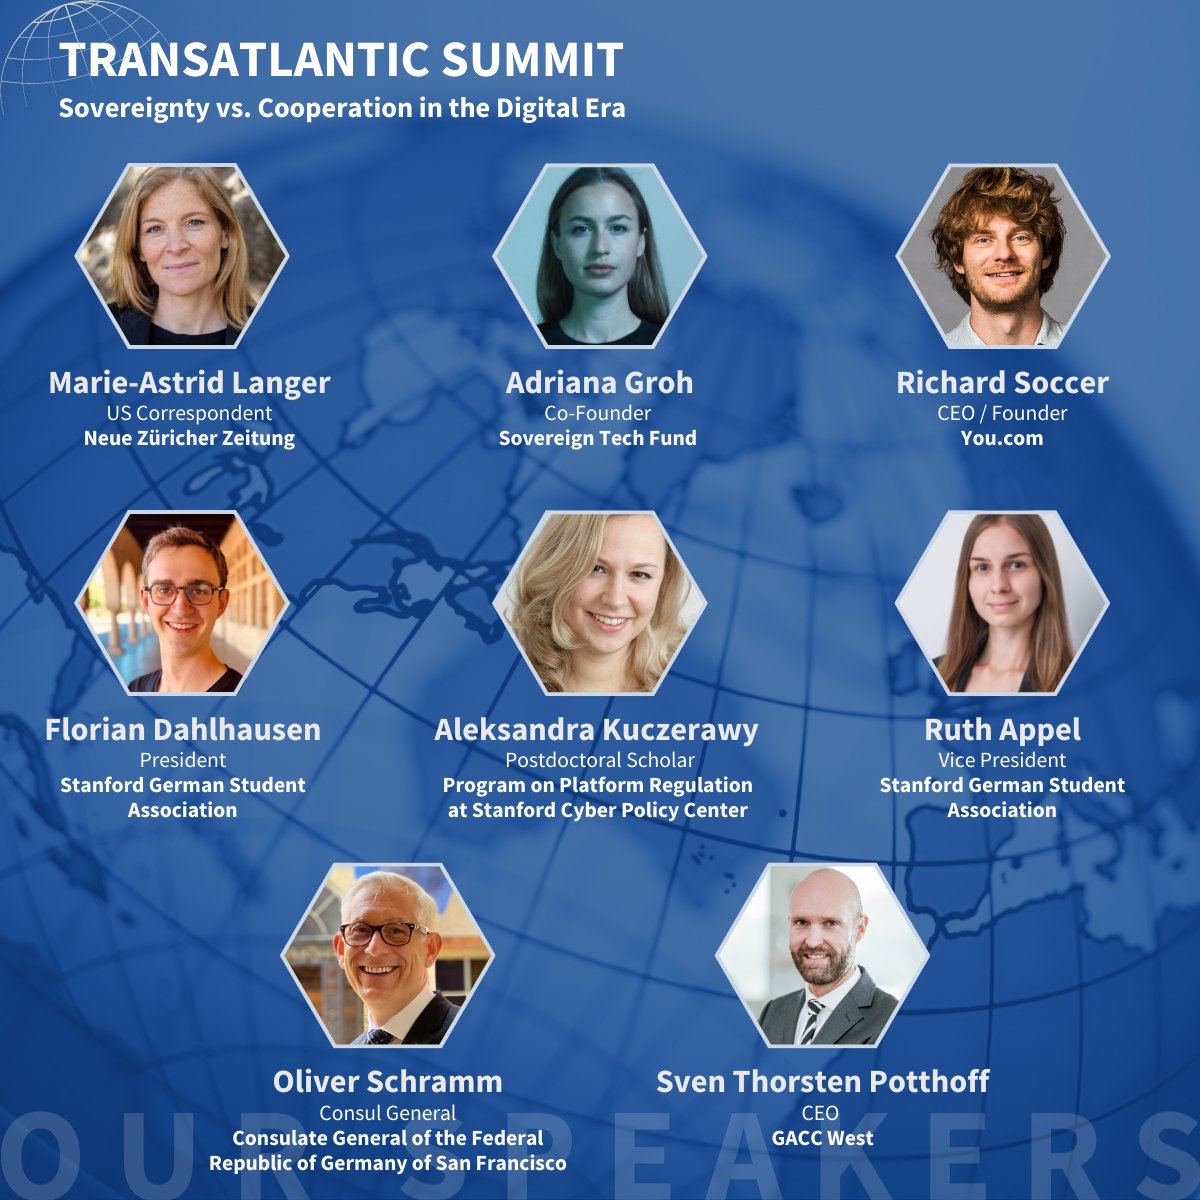 Join the experts and us for the start of a new #Transatlantic movement seeking synergies between technology and society, and become part of the international conversation going forward. #DigitalSovereignty #Geopolitics #Misinformation Register here: lnkd.in/gMmSAQmz